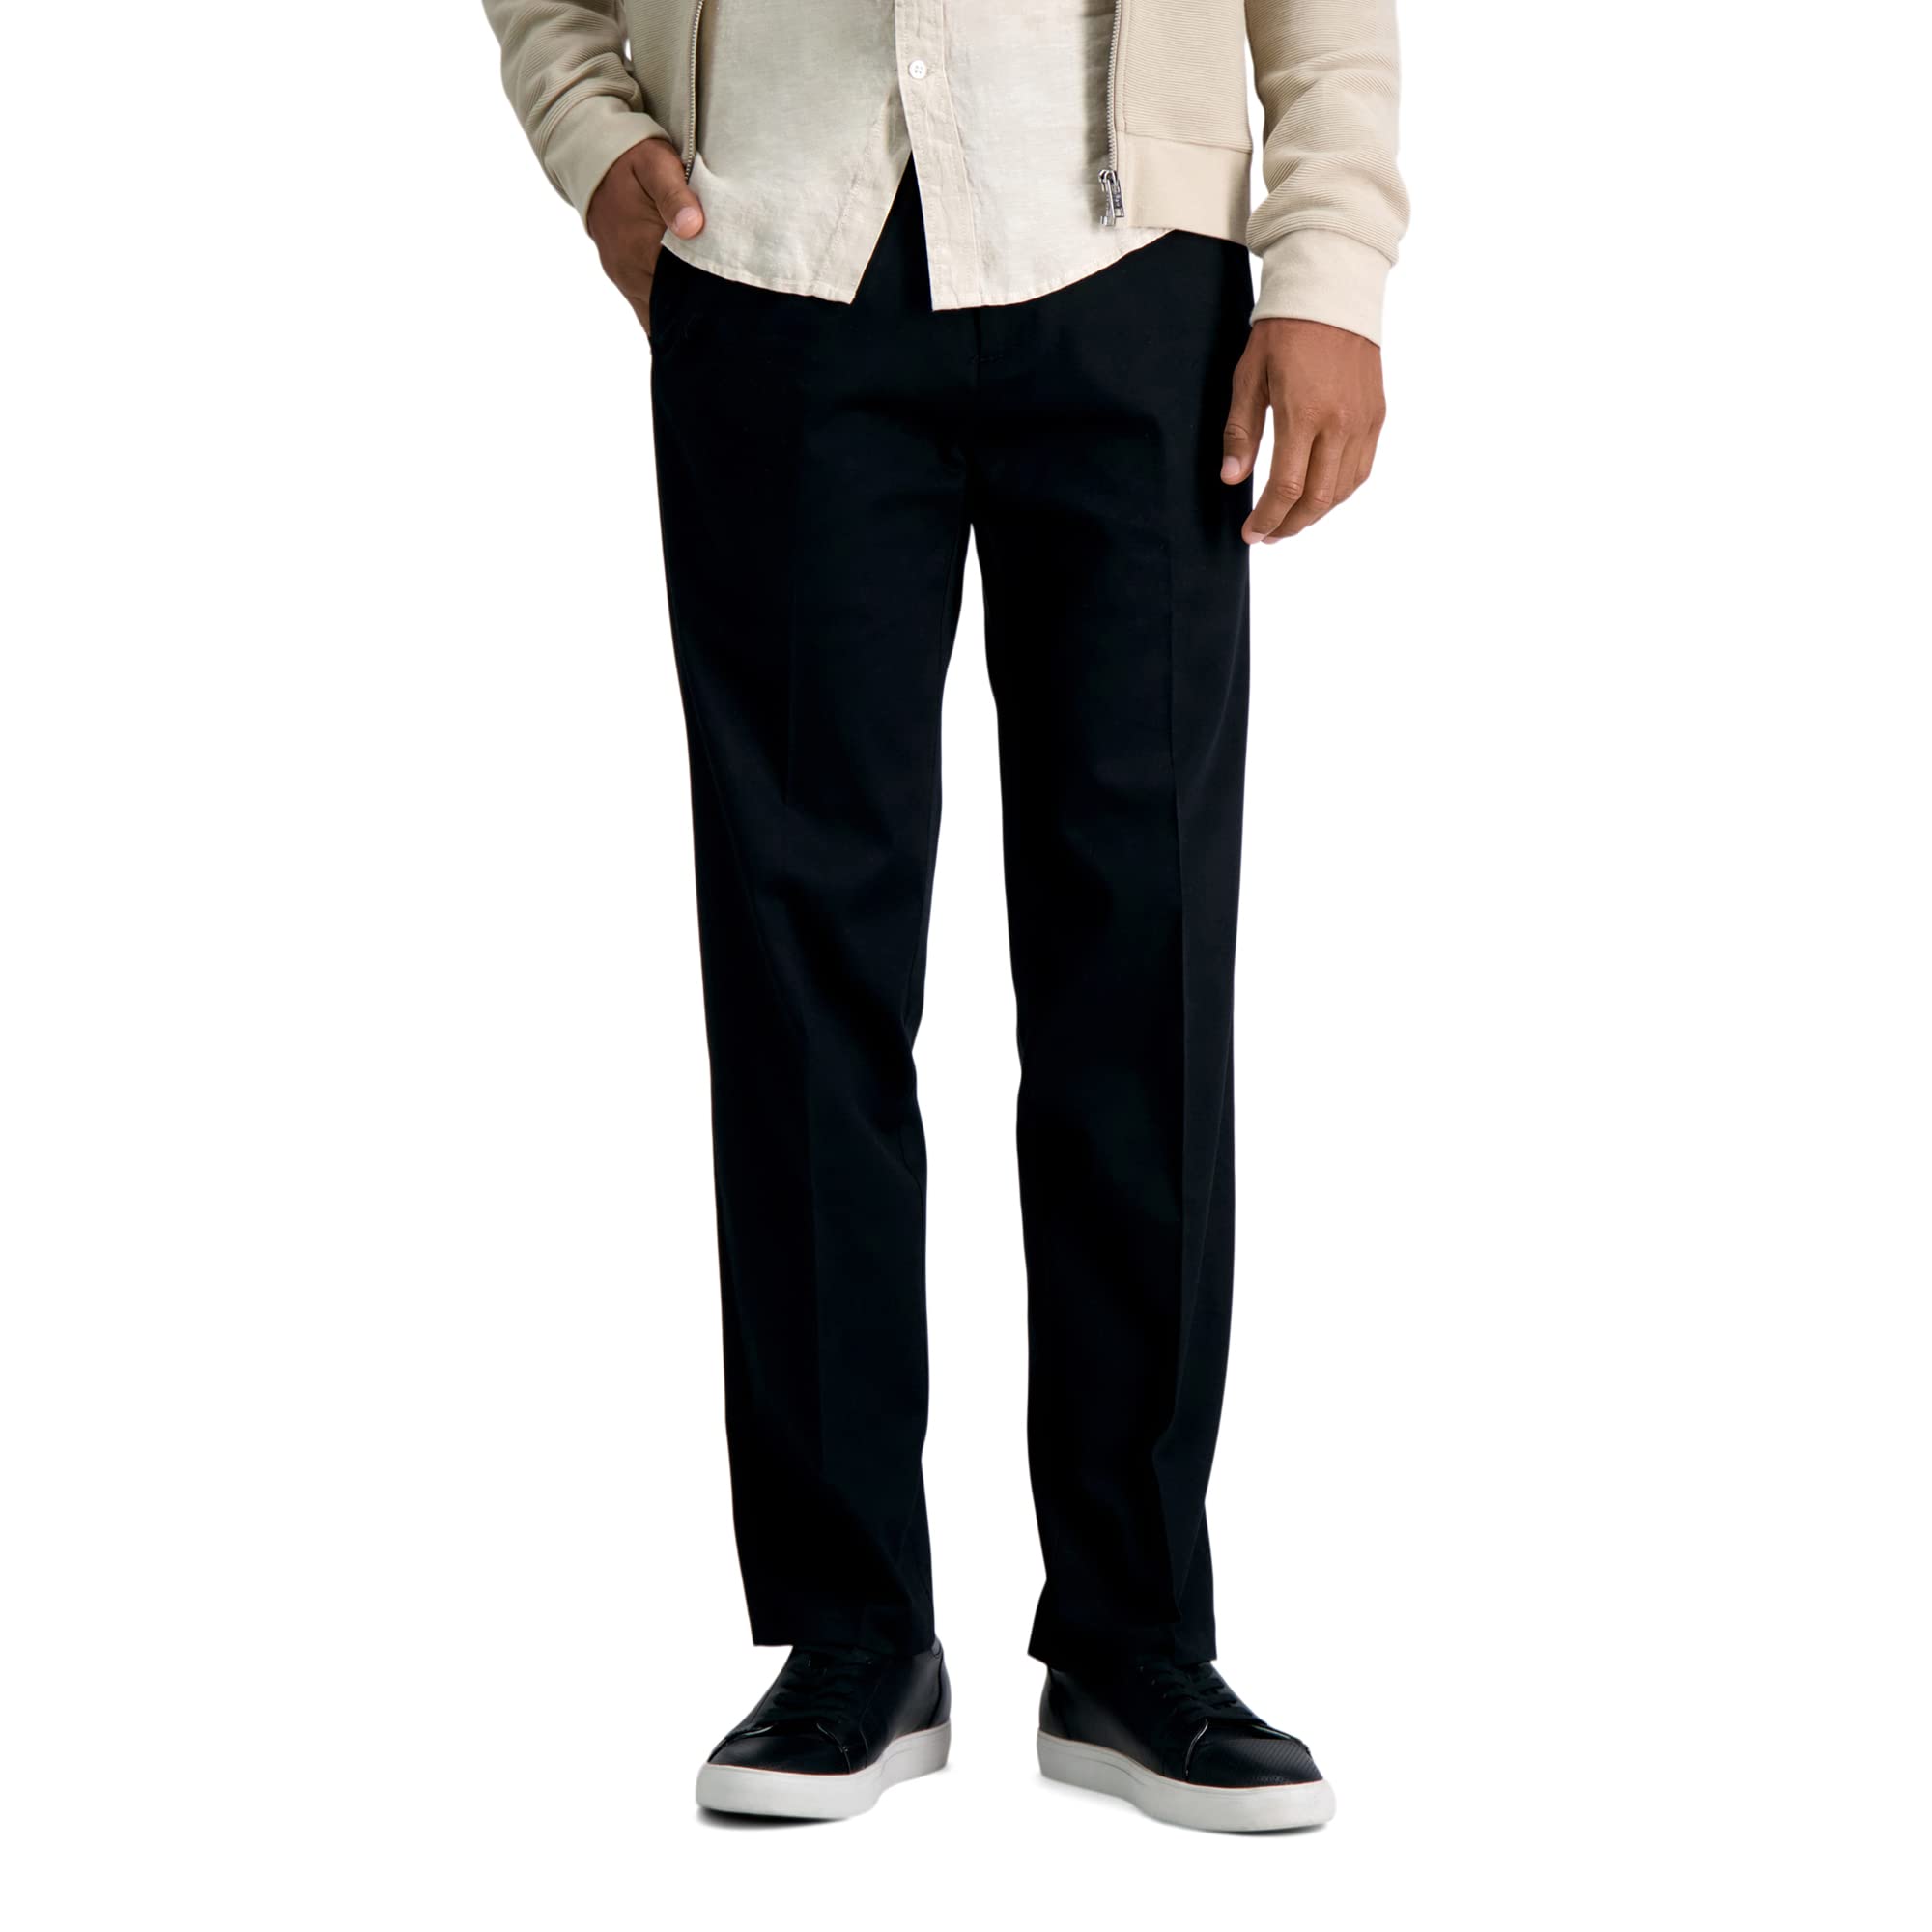 Haggar Men's Premium No Iron Khaki Straight Fit & Slim Fit Flat Front Casual Pant (Black, Various Sizes) $22 + Free Shipping w/ Prime or on $35+